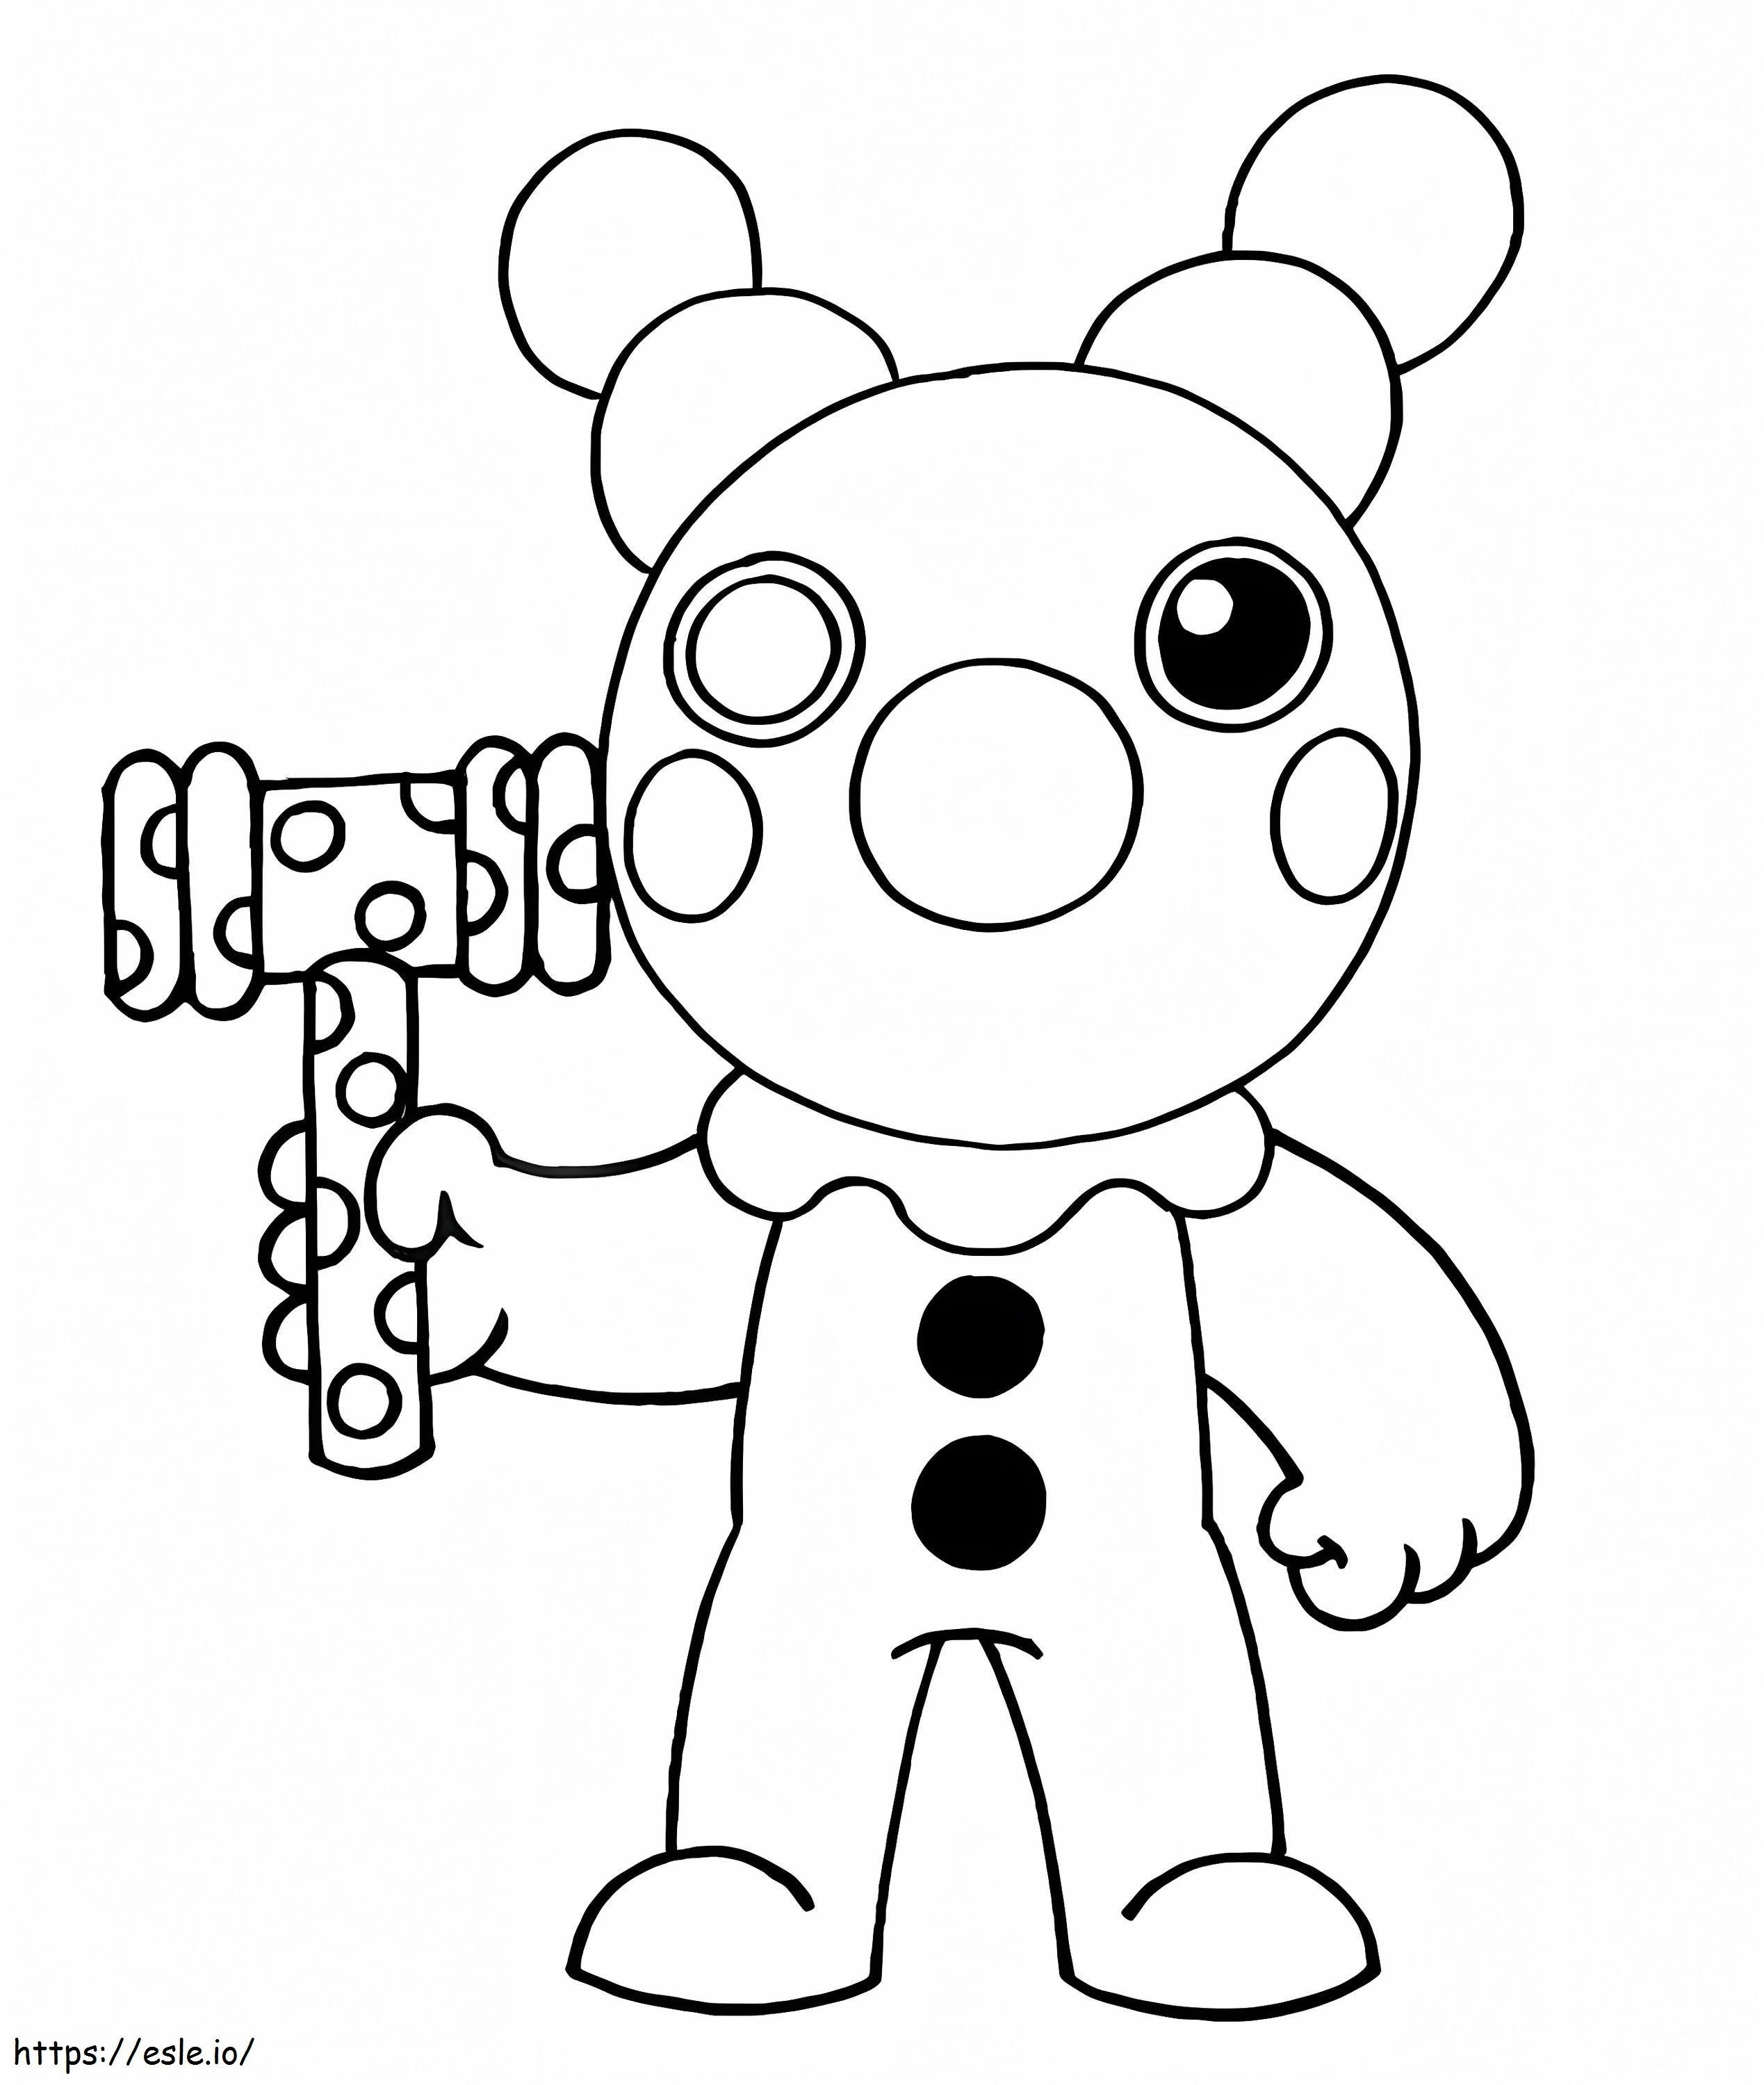 Clowny Piggy Roblox coloring page